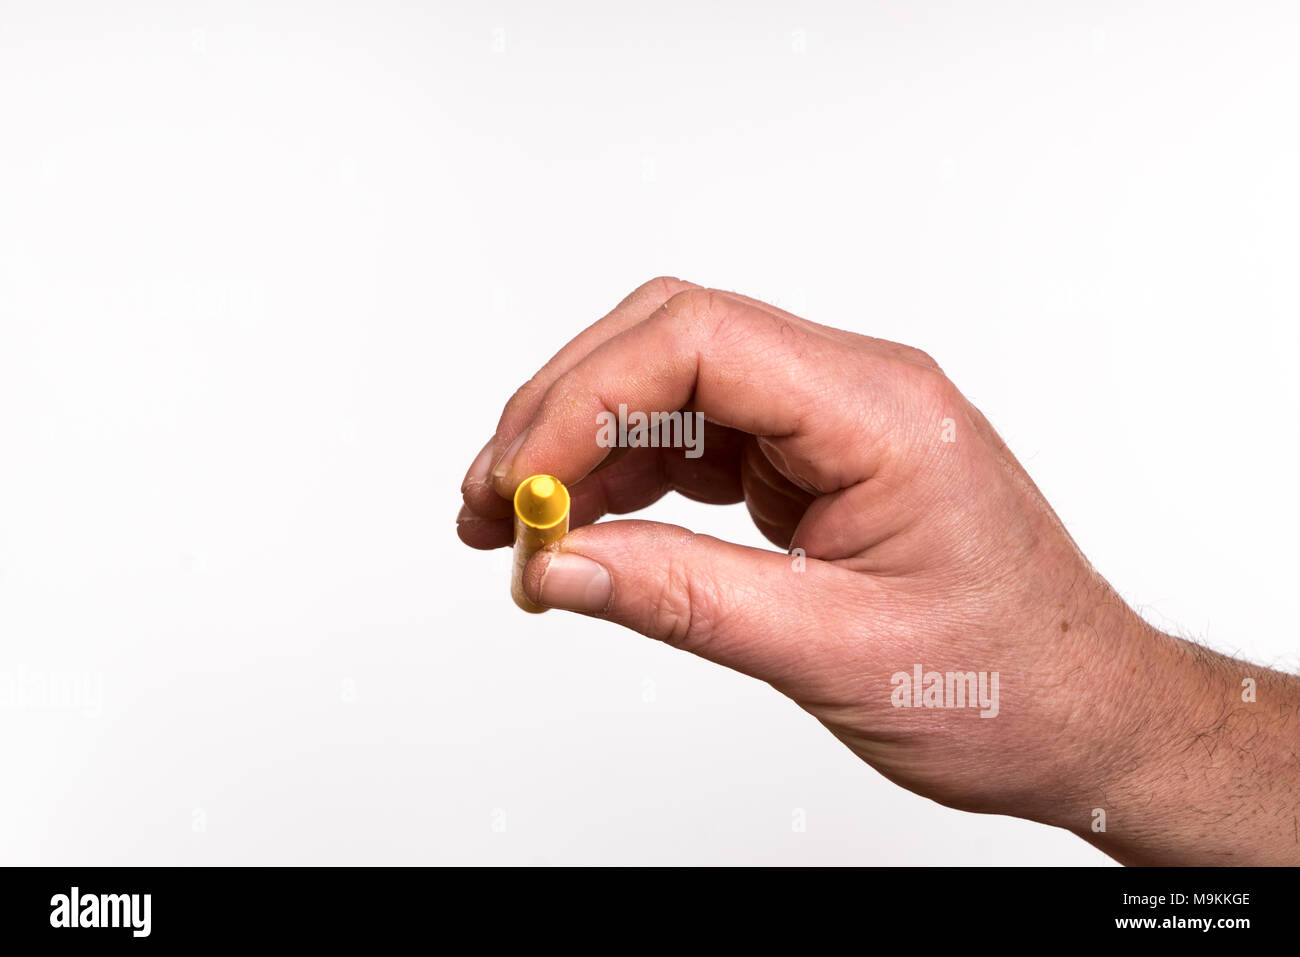 A yellow wax crayon in the hand Stock Photo